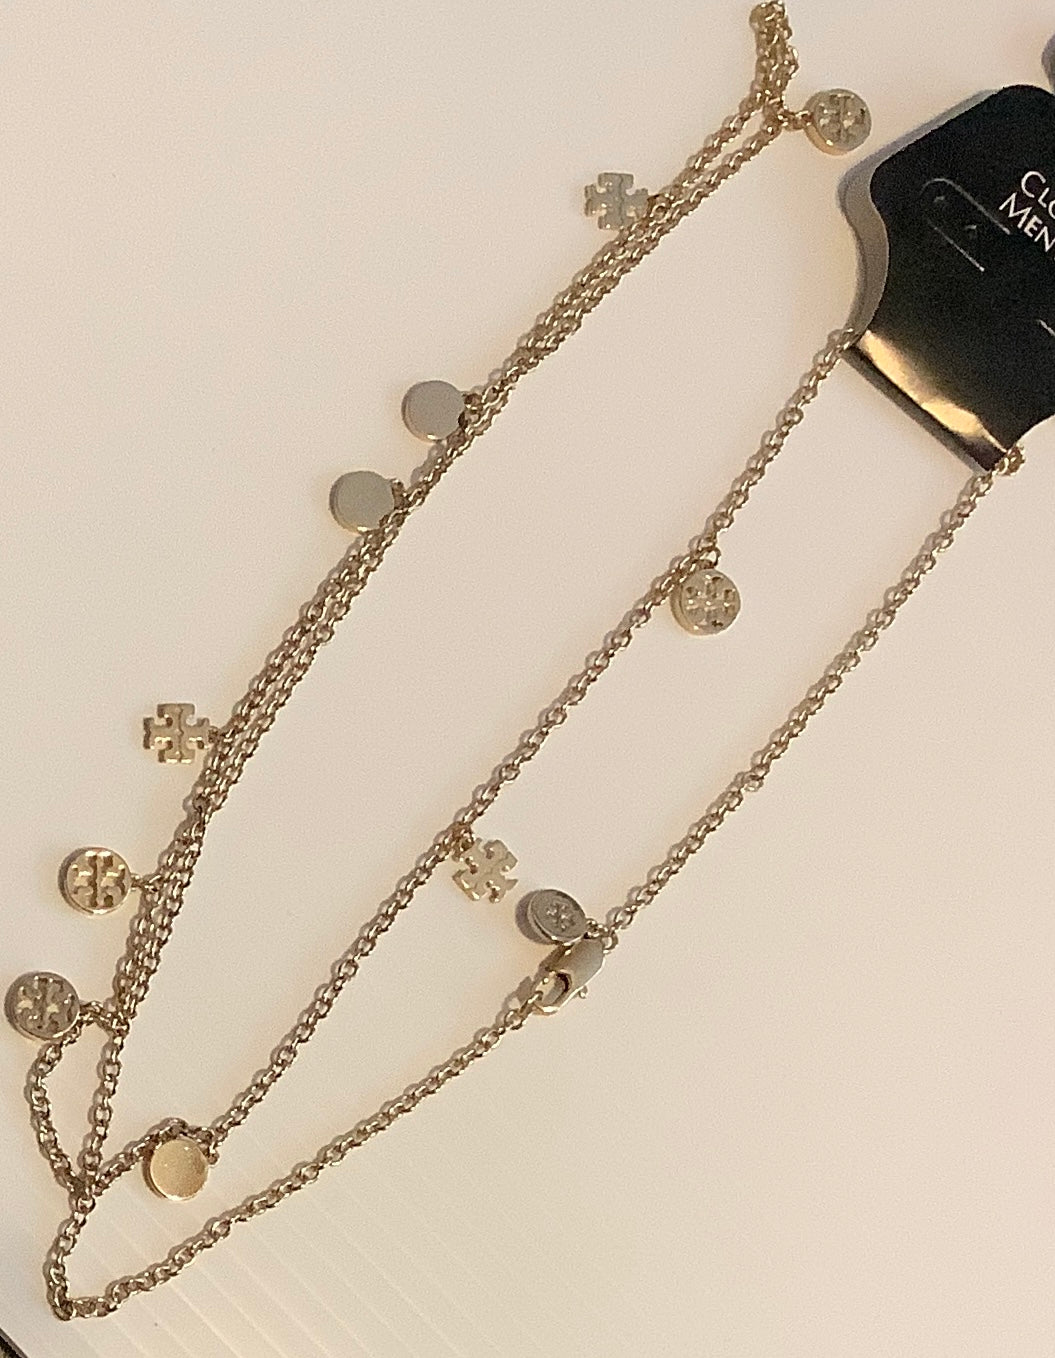 Necklace Chain By Tory Burch